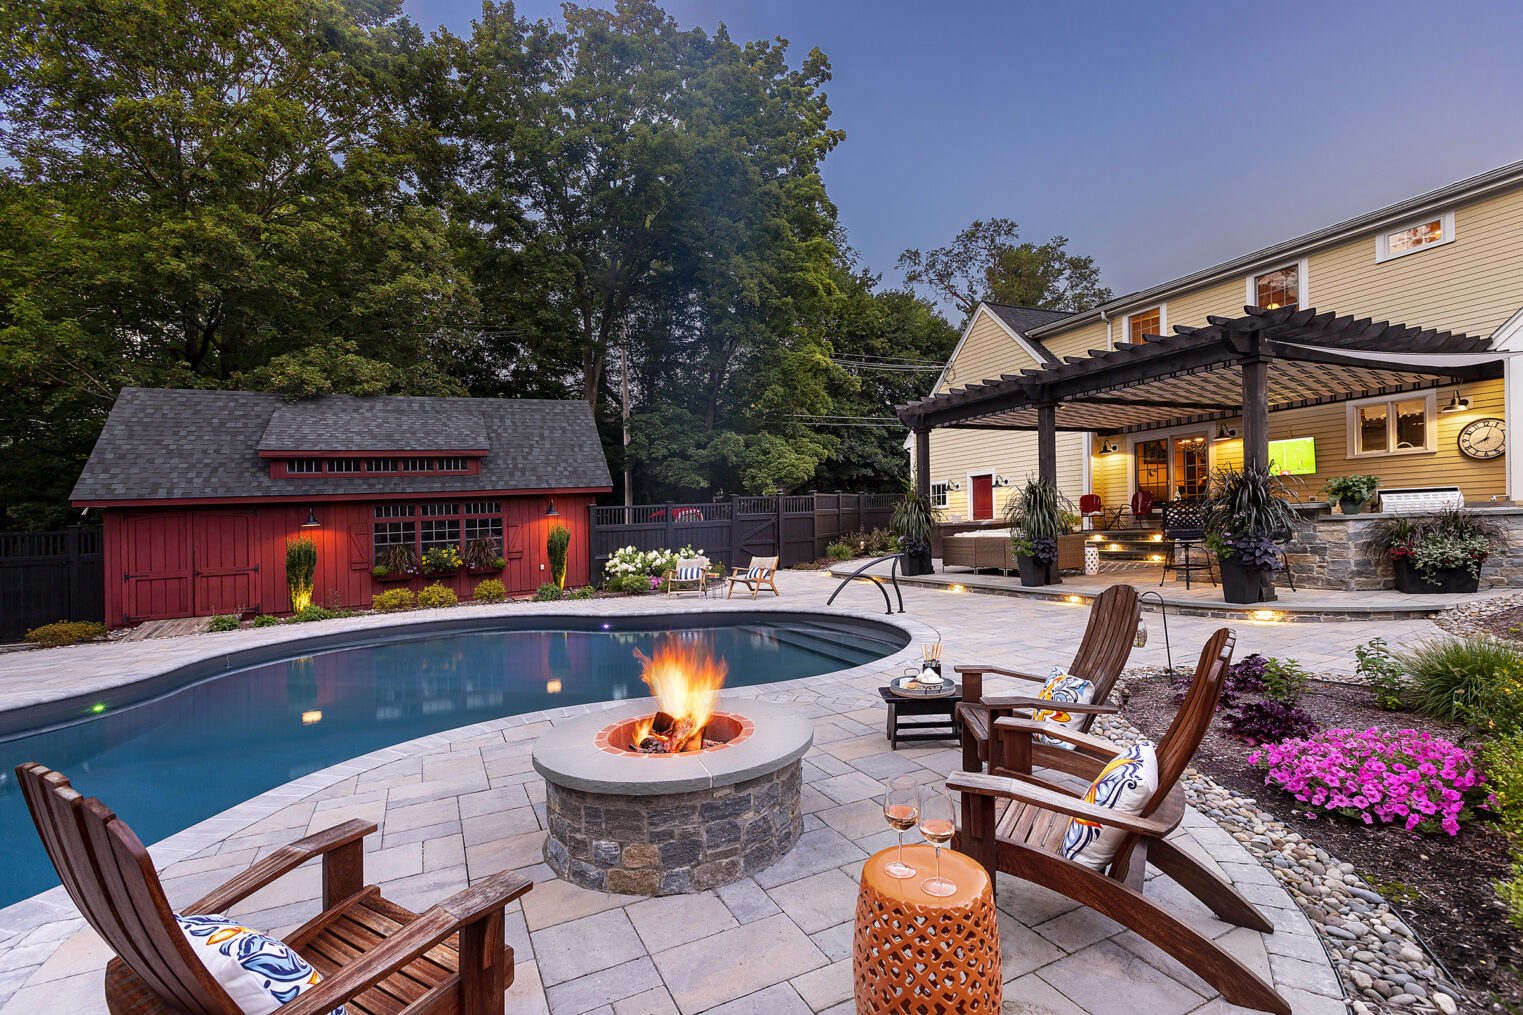 Fire pit on paver pool deck with outdoor kitchen and patio. Dex by Terra Residential Landscape Design-Build in Stow, MA.